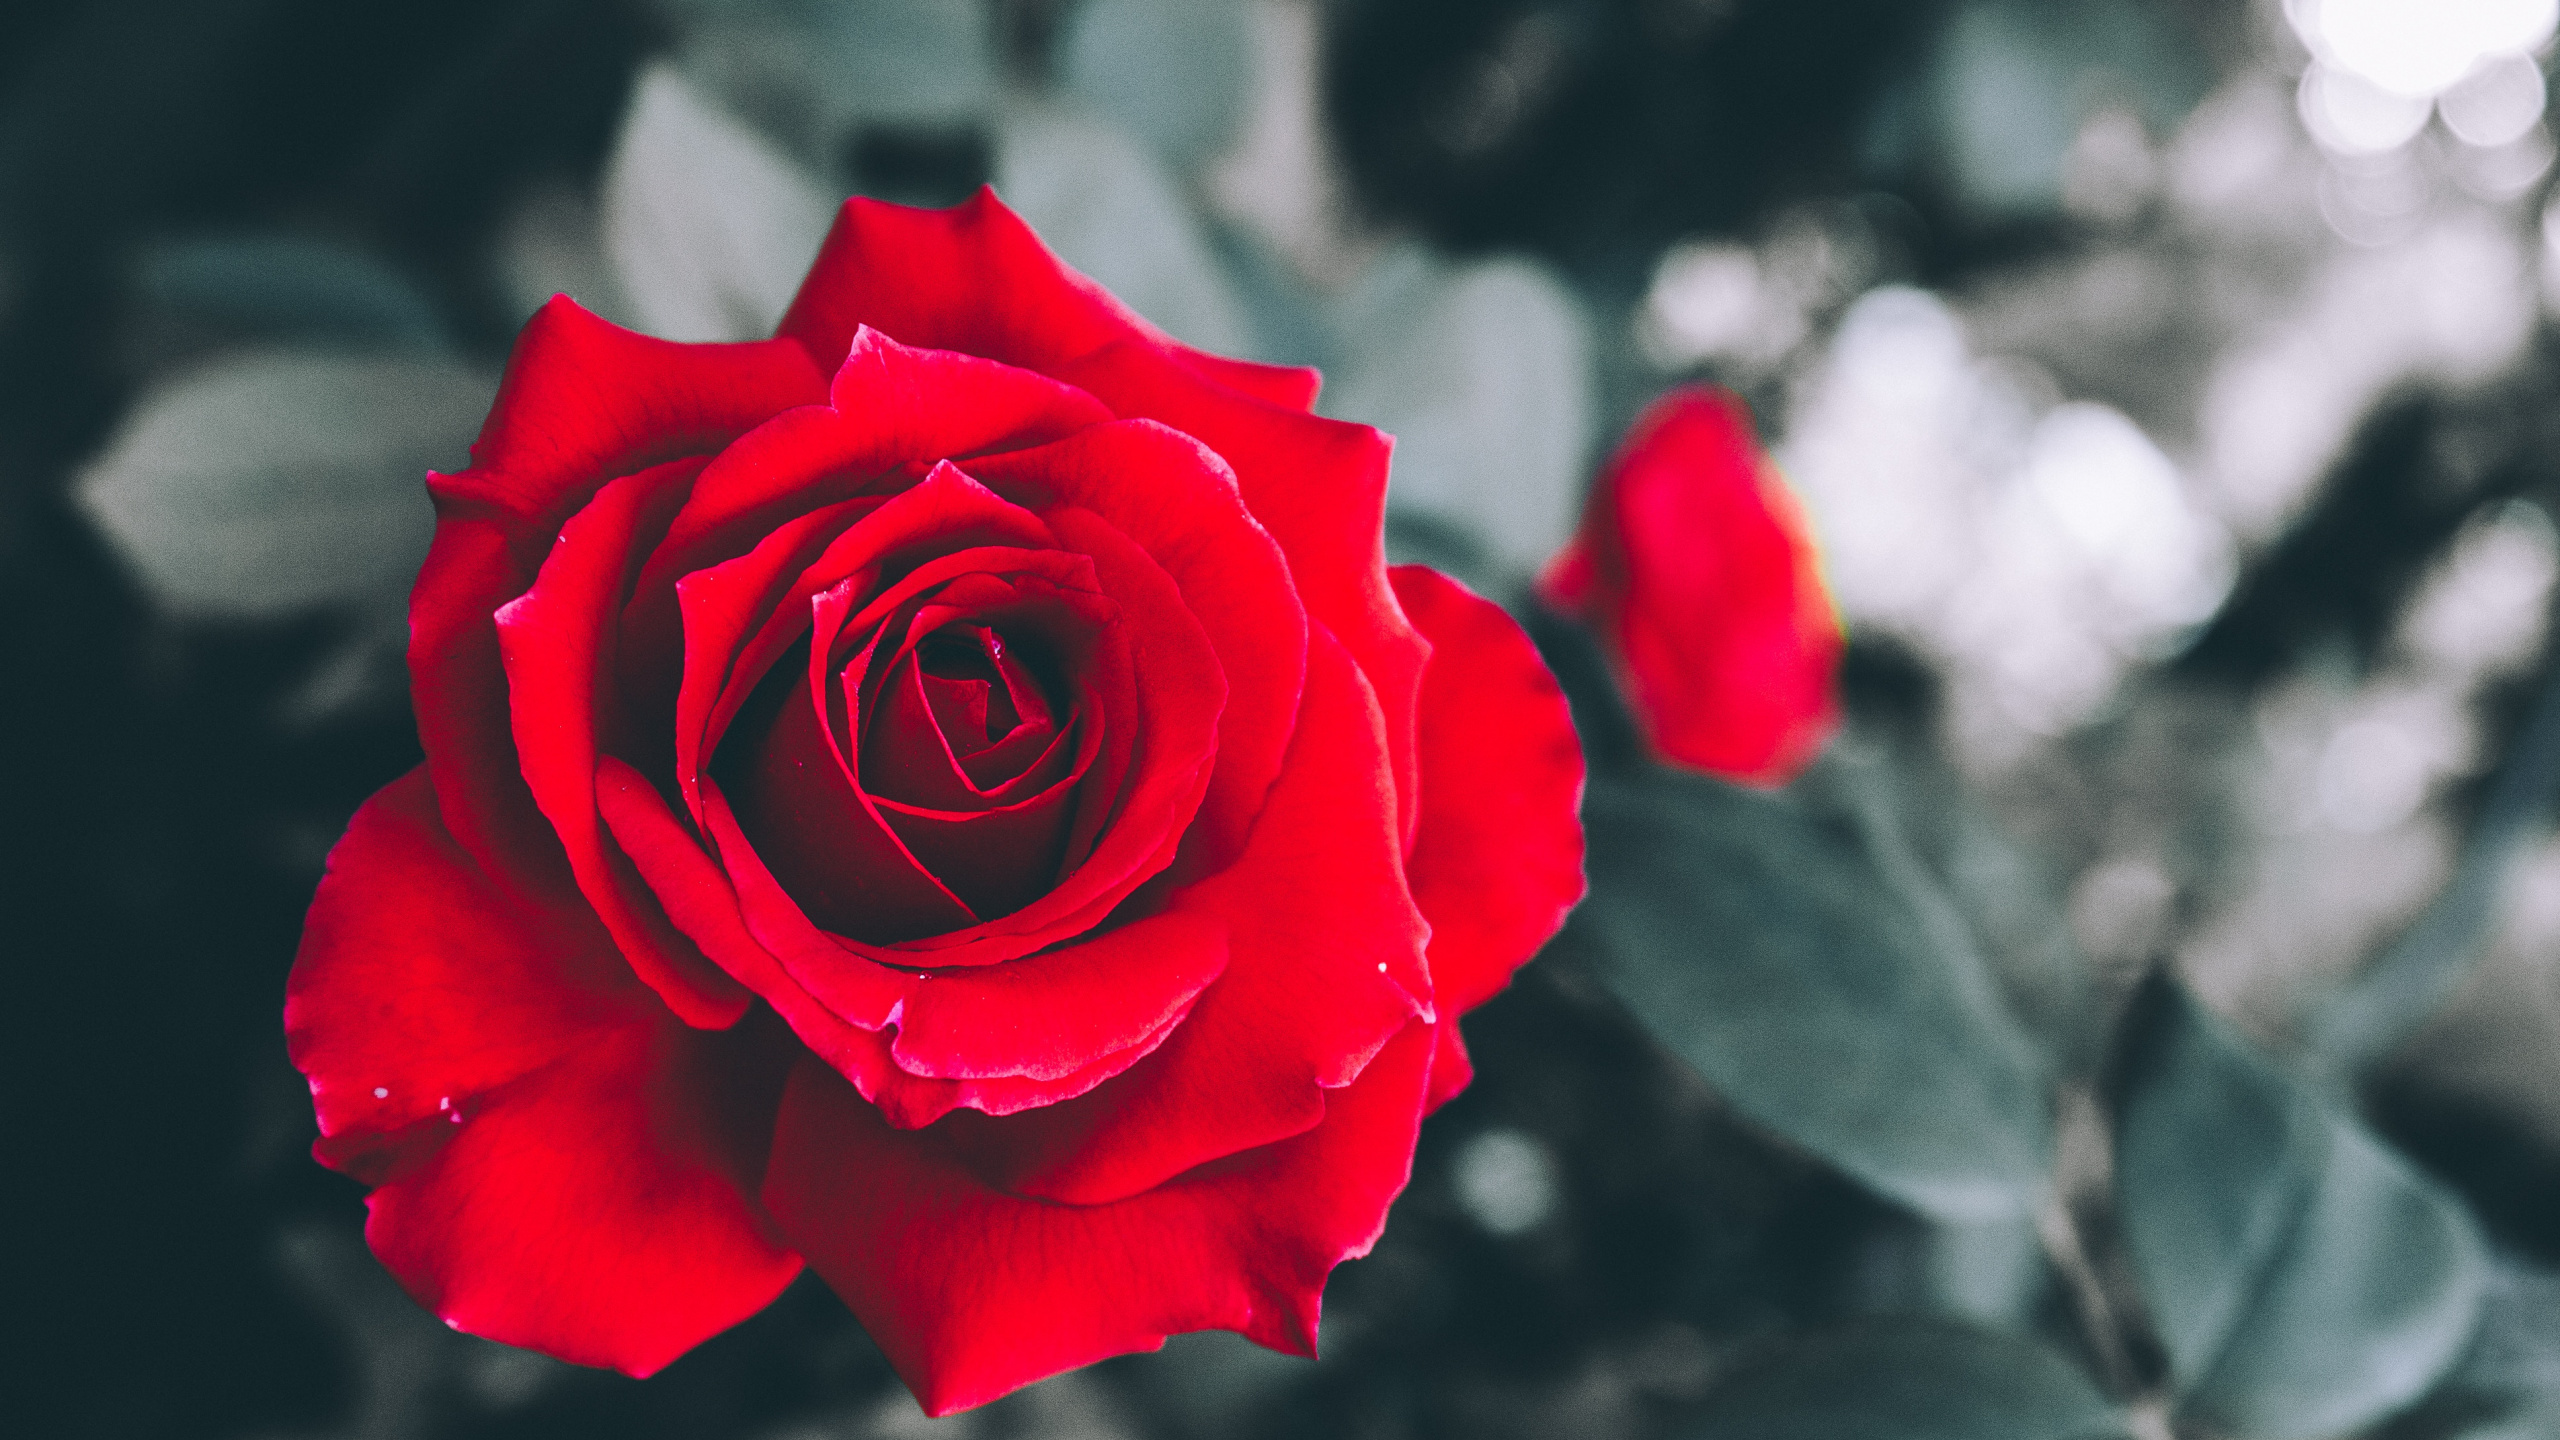 Red Rose in Bloom in Close up Photography. Wallpaper in 2560x1440 Resolution